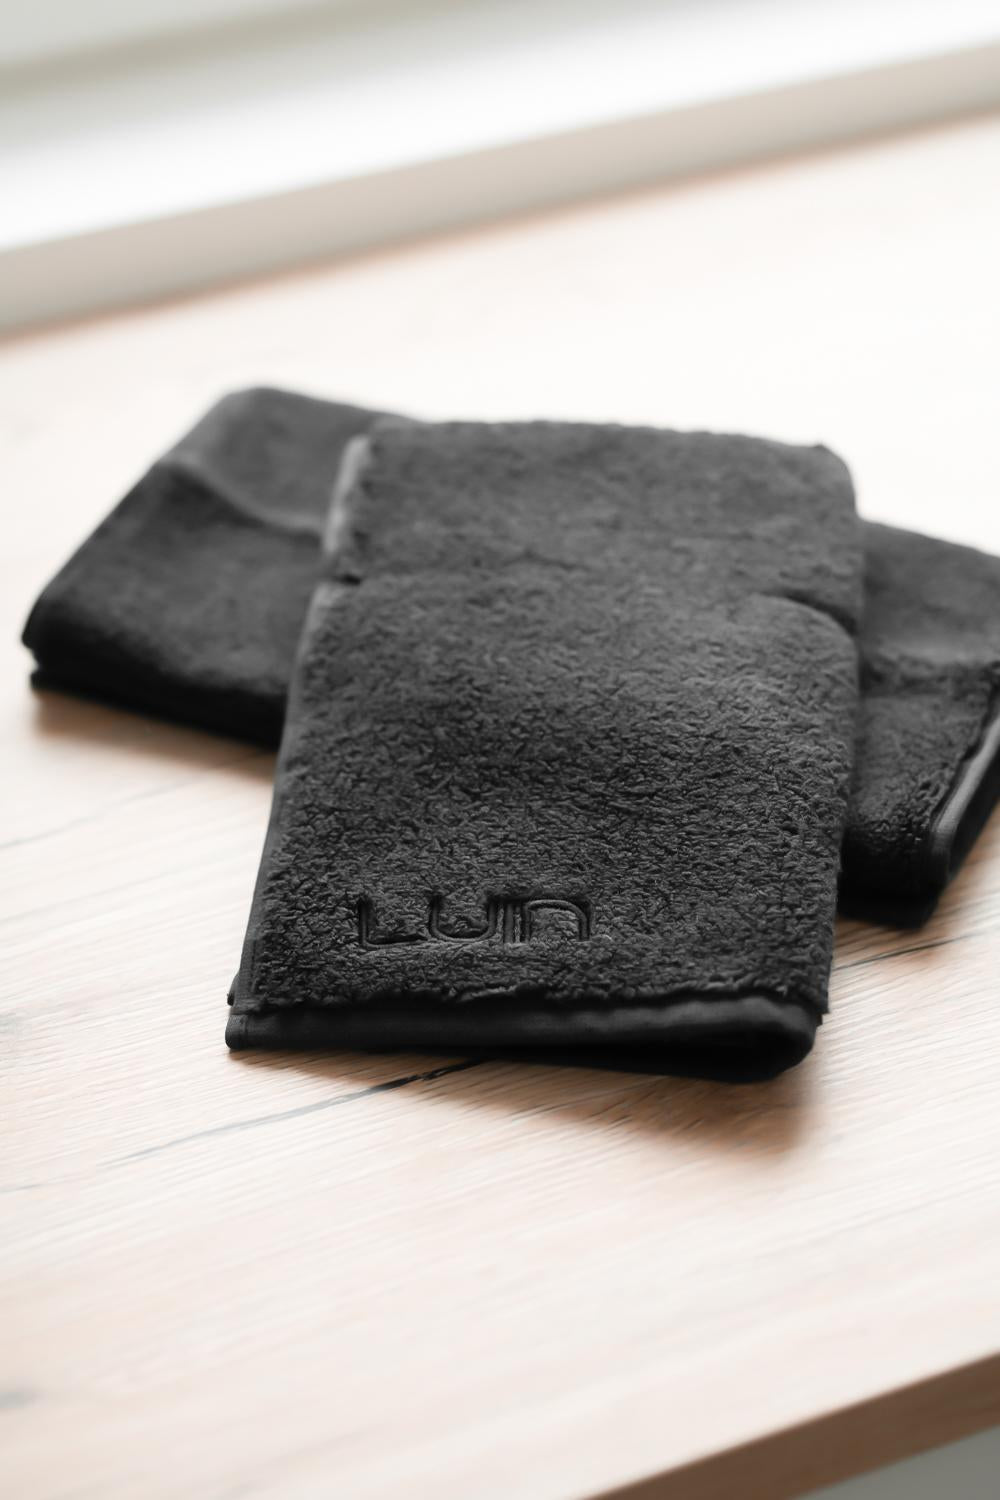 Luin Living Towels, Black, 4 different sizes